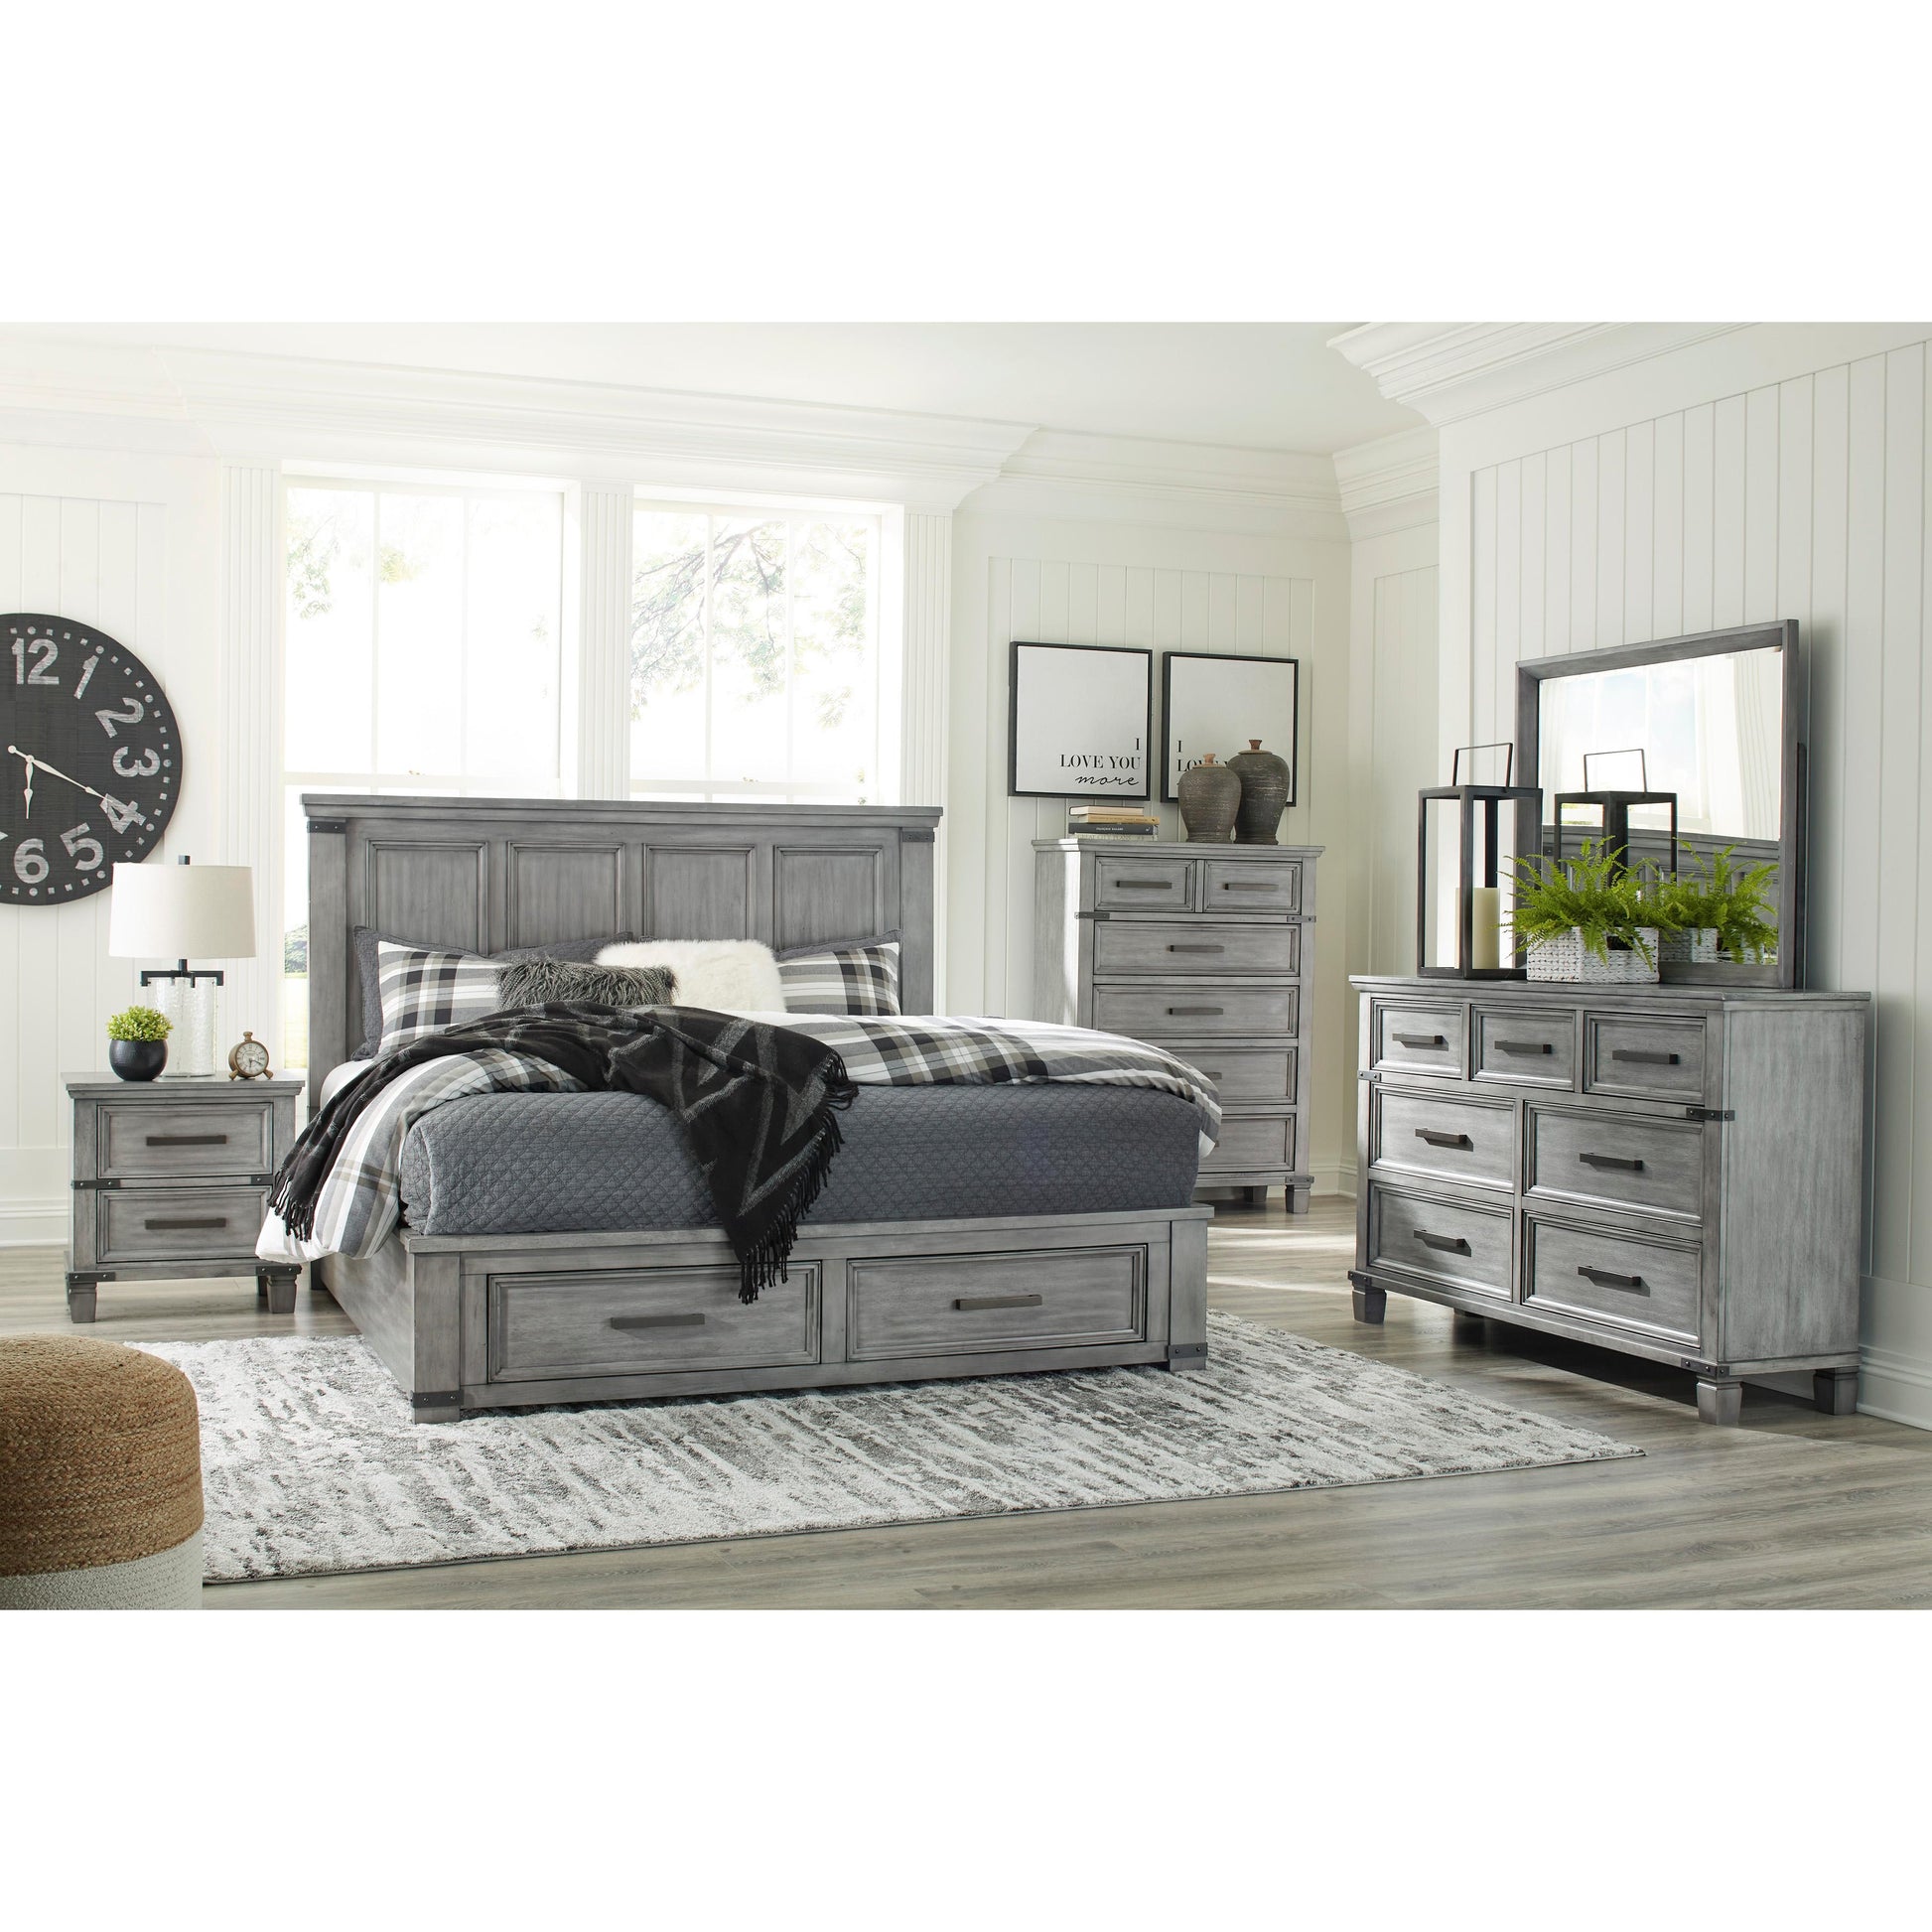 Signature Design by Ashley Russelyn B772 8 pc King Panel Bedroom Set IMAGE 1